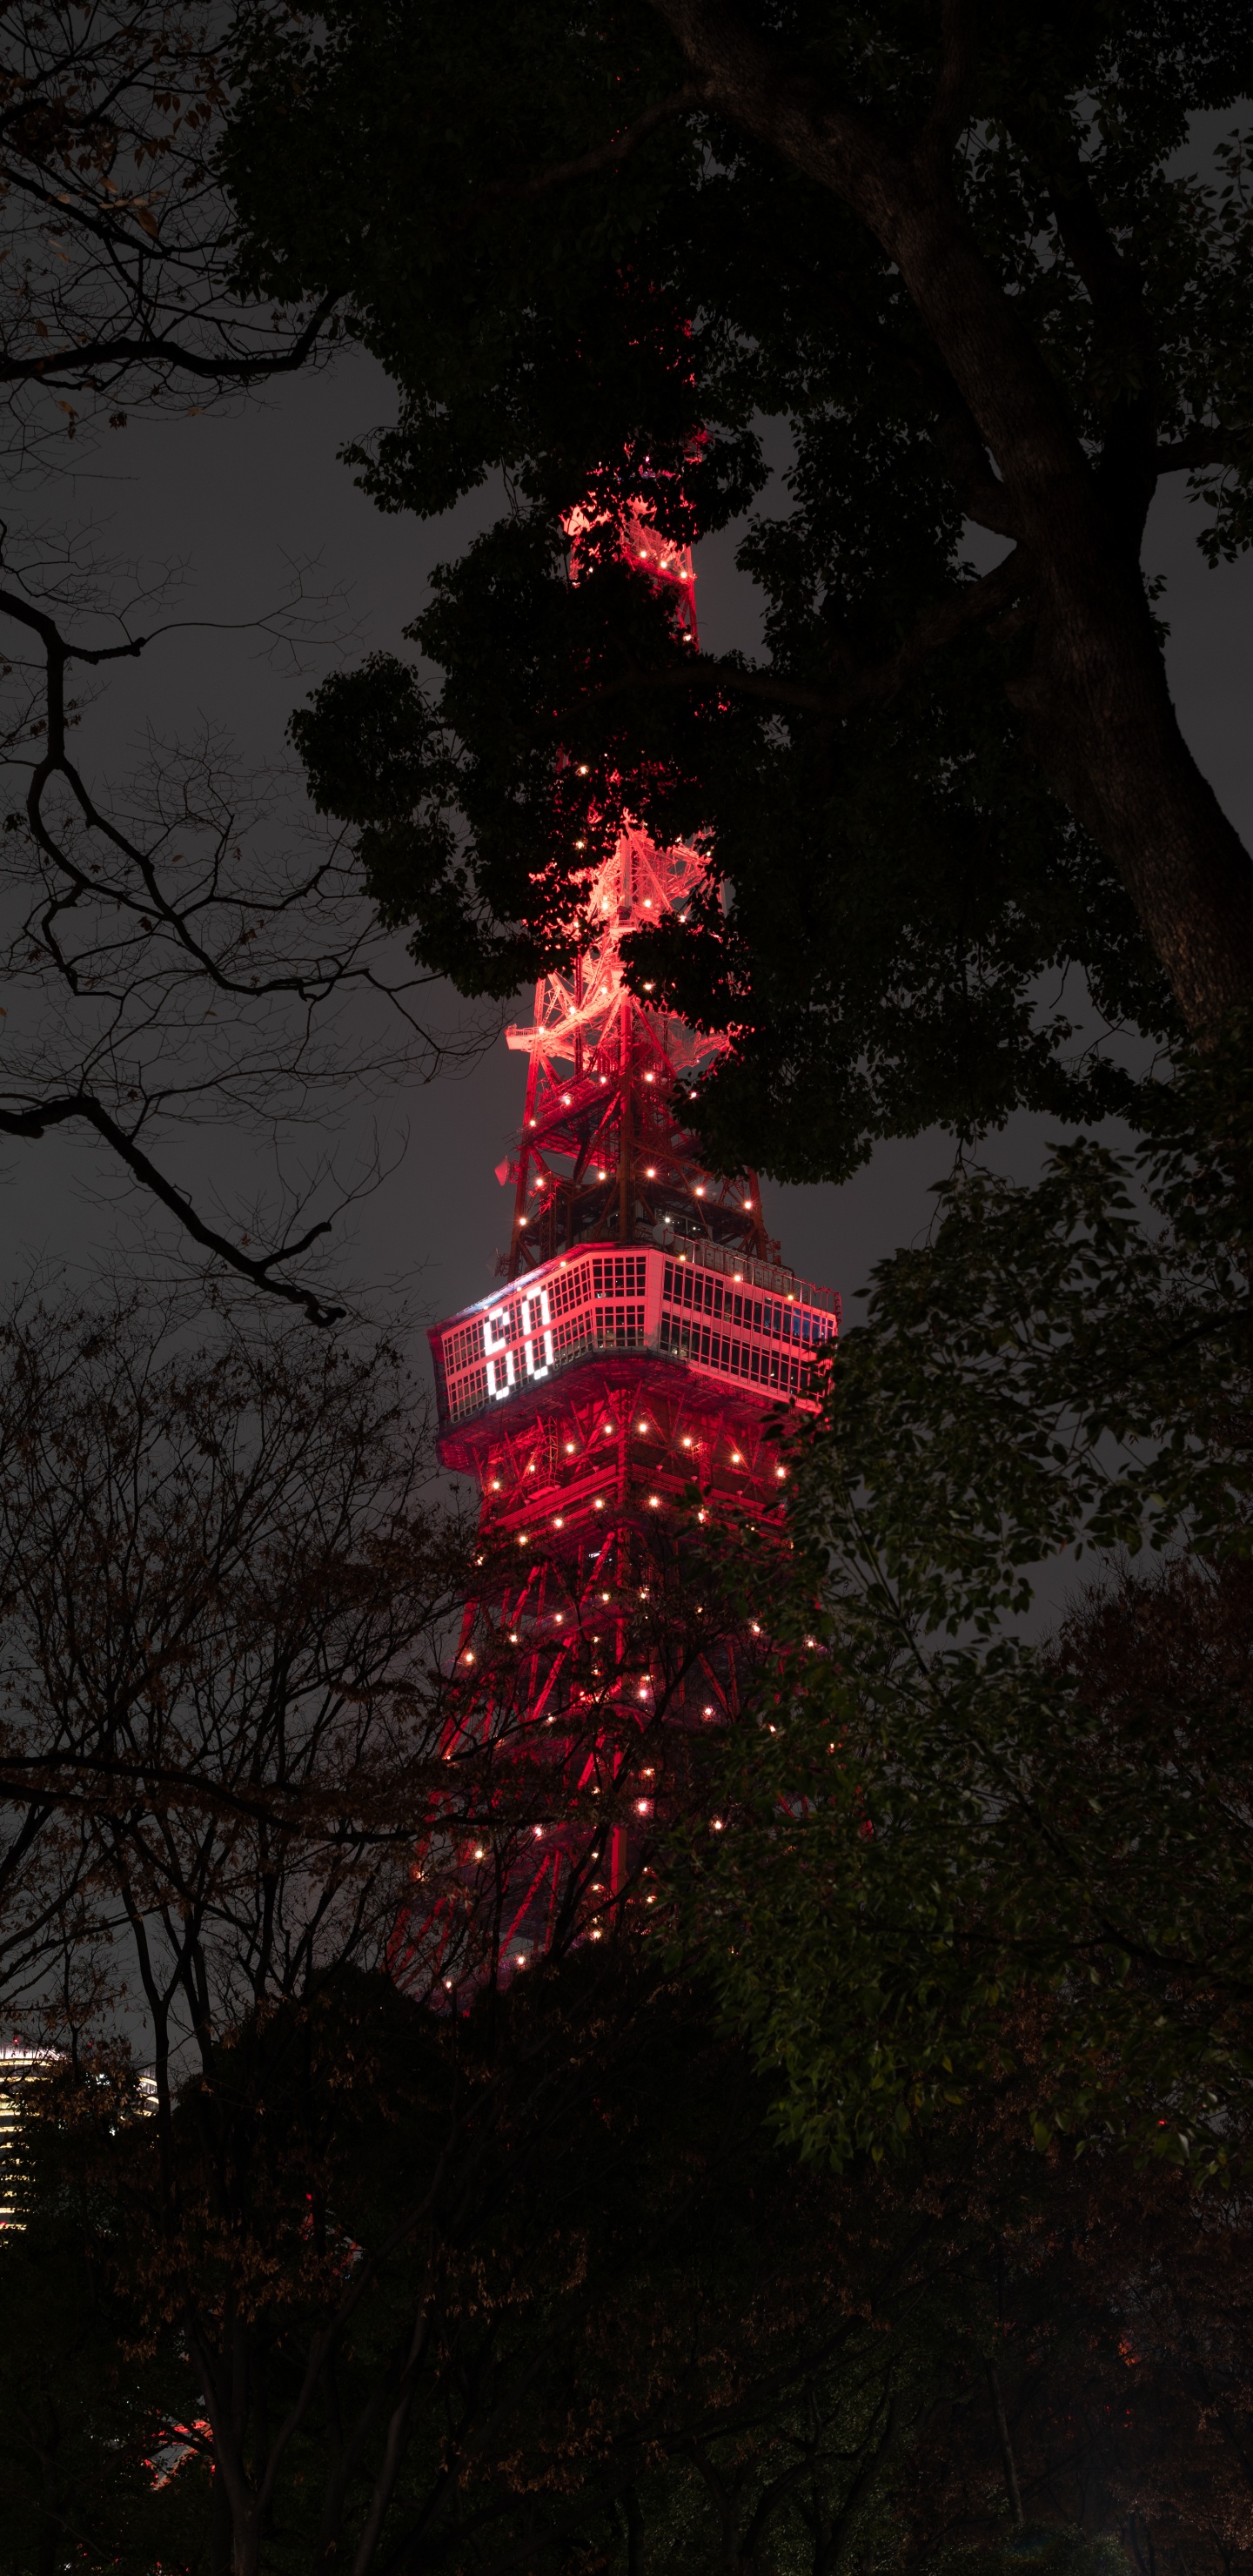 Red and White Tower Near Trees During Night Time. Wallpaper in 1440x2960 Resolution